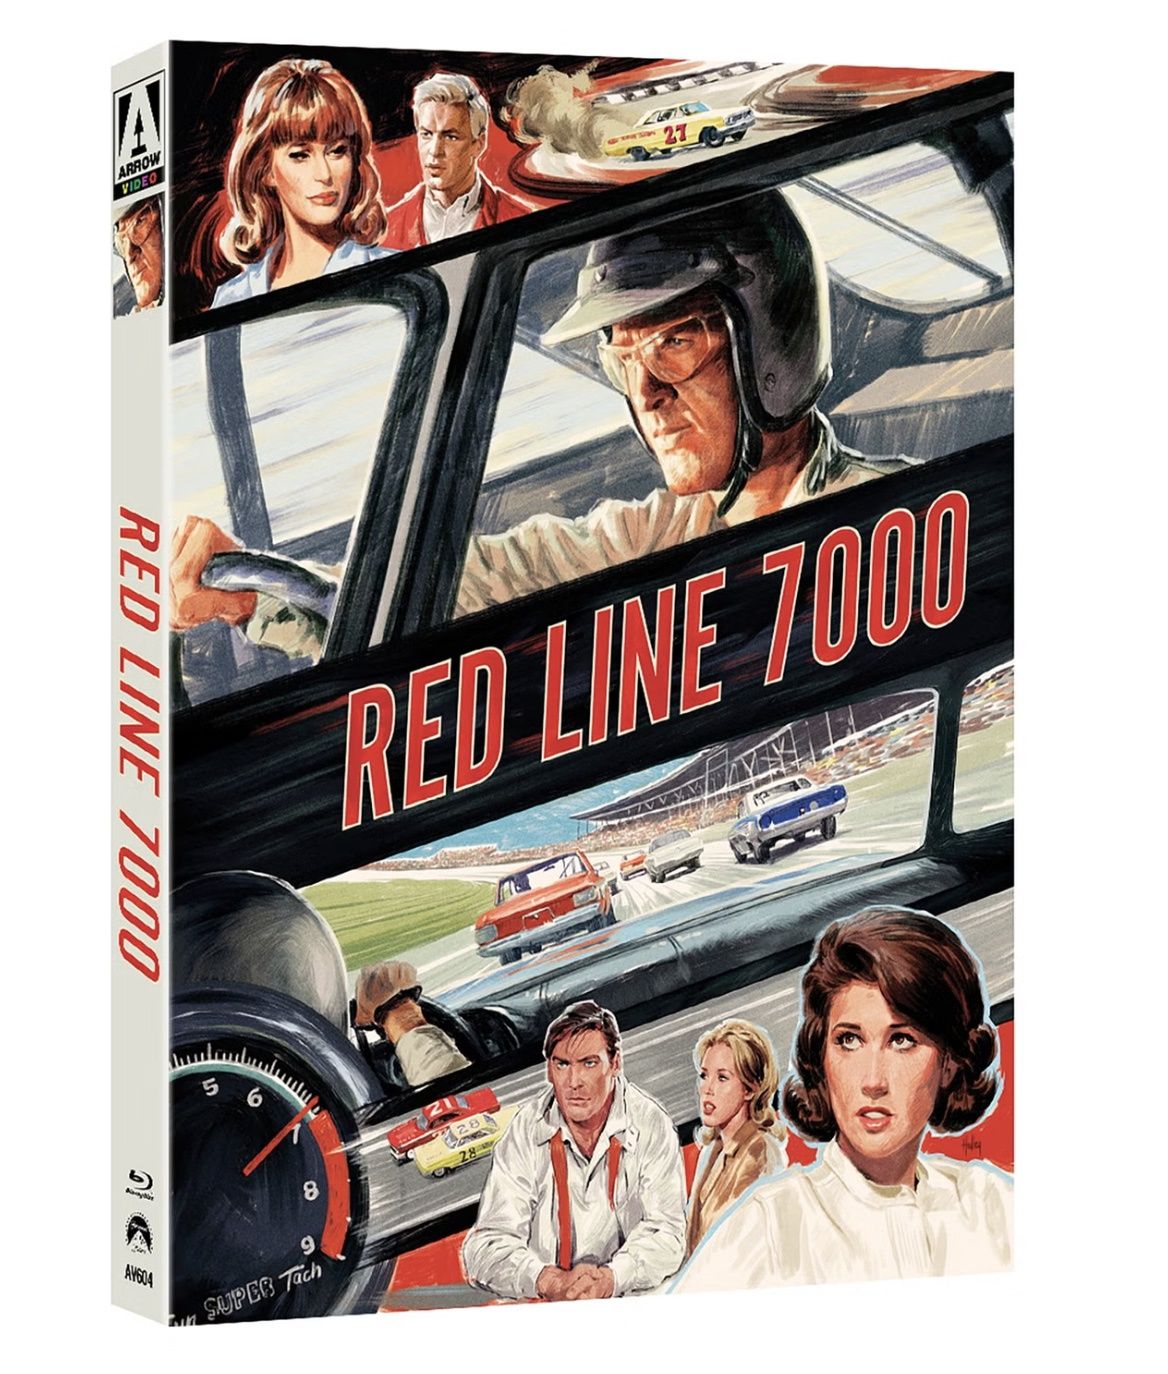 Red Line 7000 LE (Blu-ray) ***Preorder*** 7/30